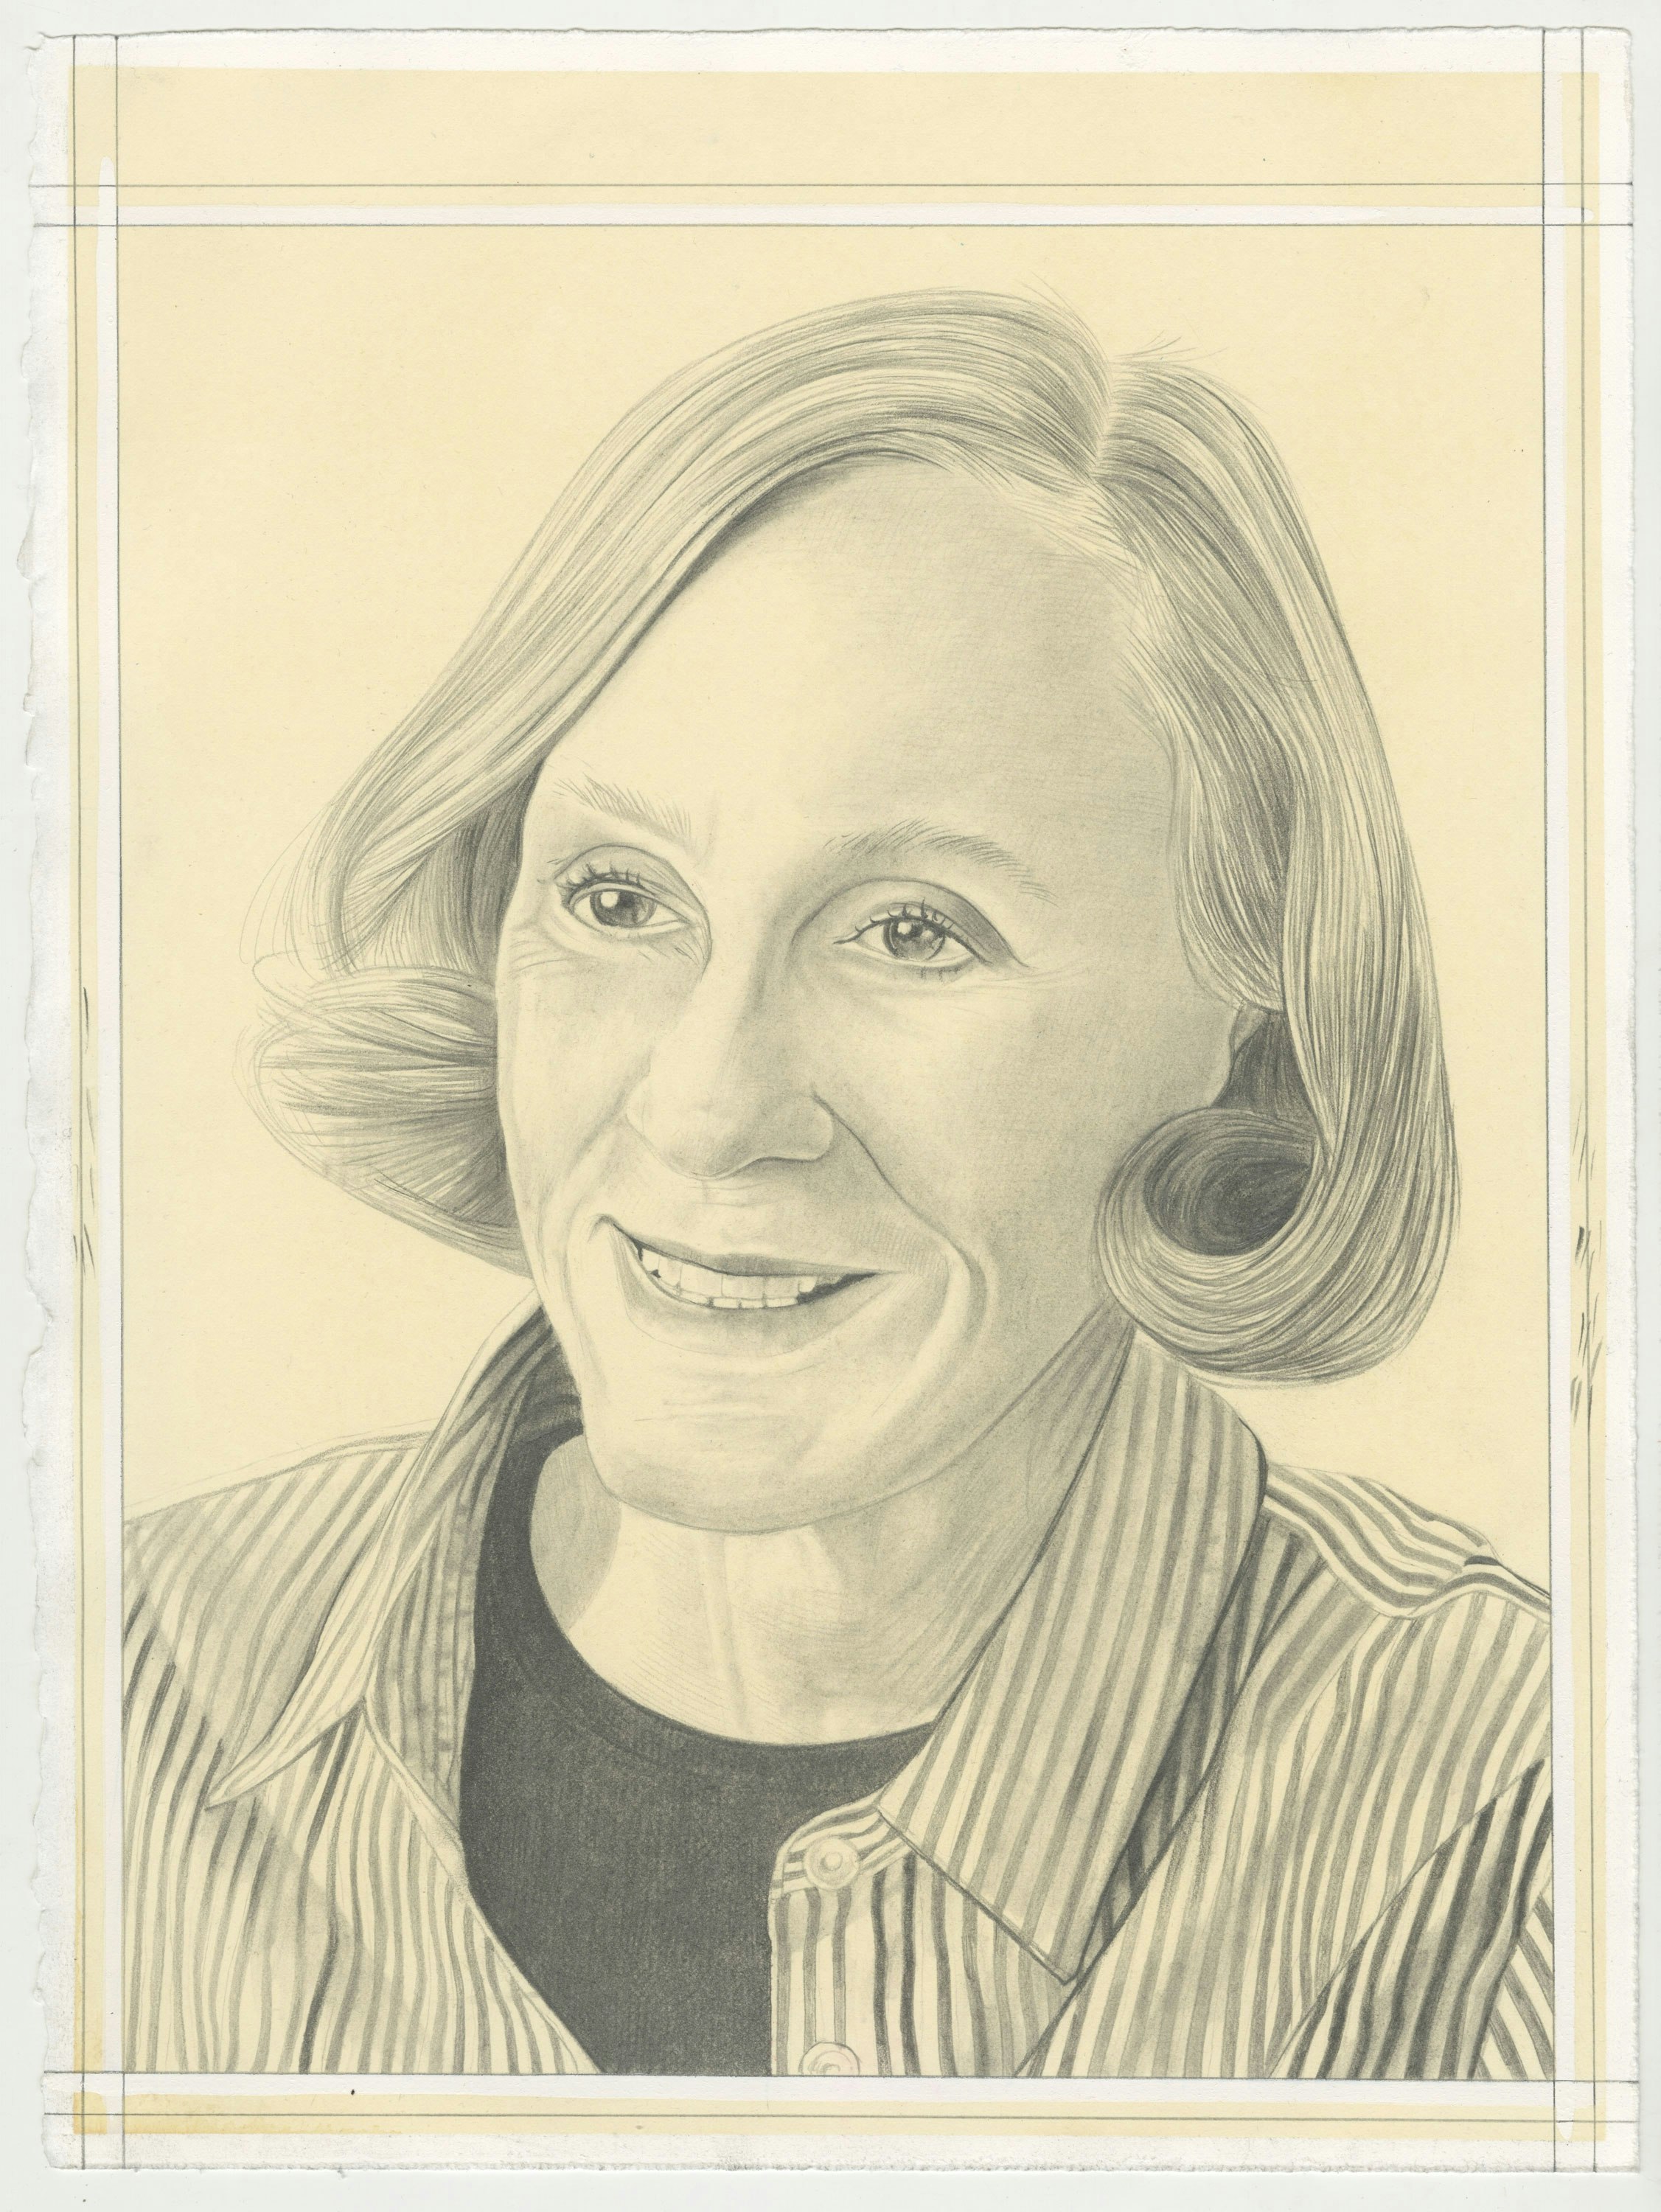 Portrait of Helen Pashgian, pencil on paper by Phong H. Bui.